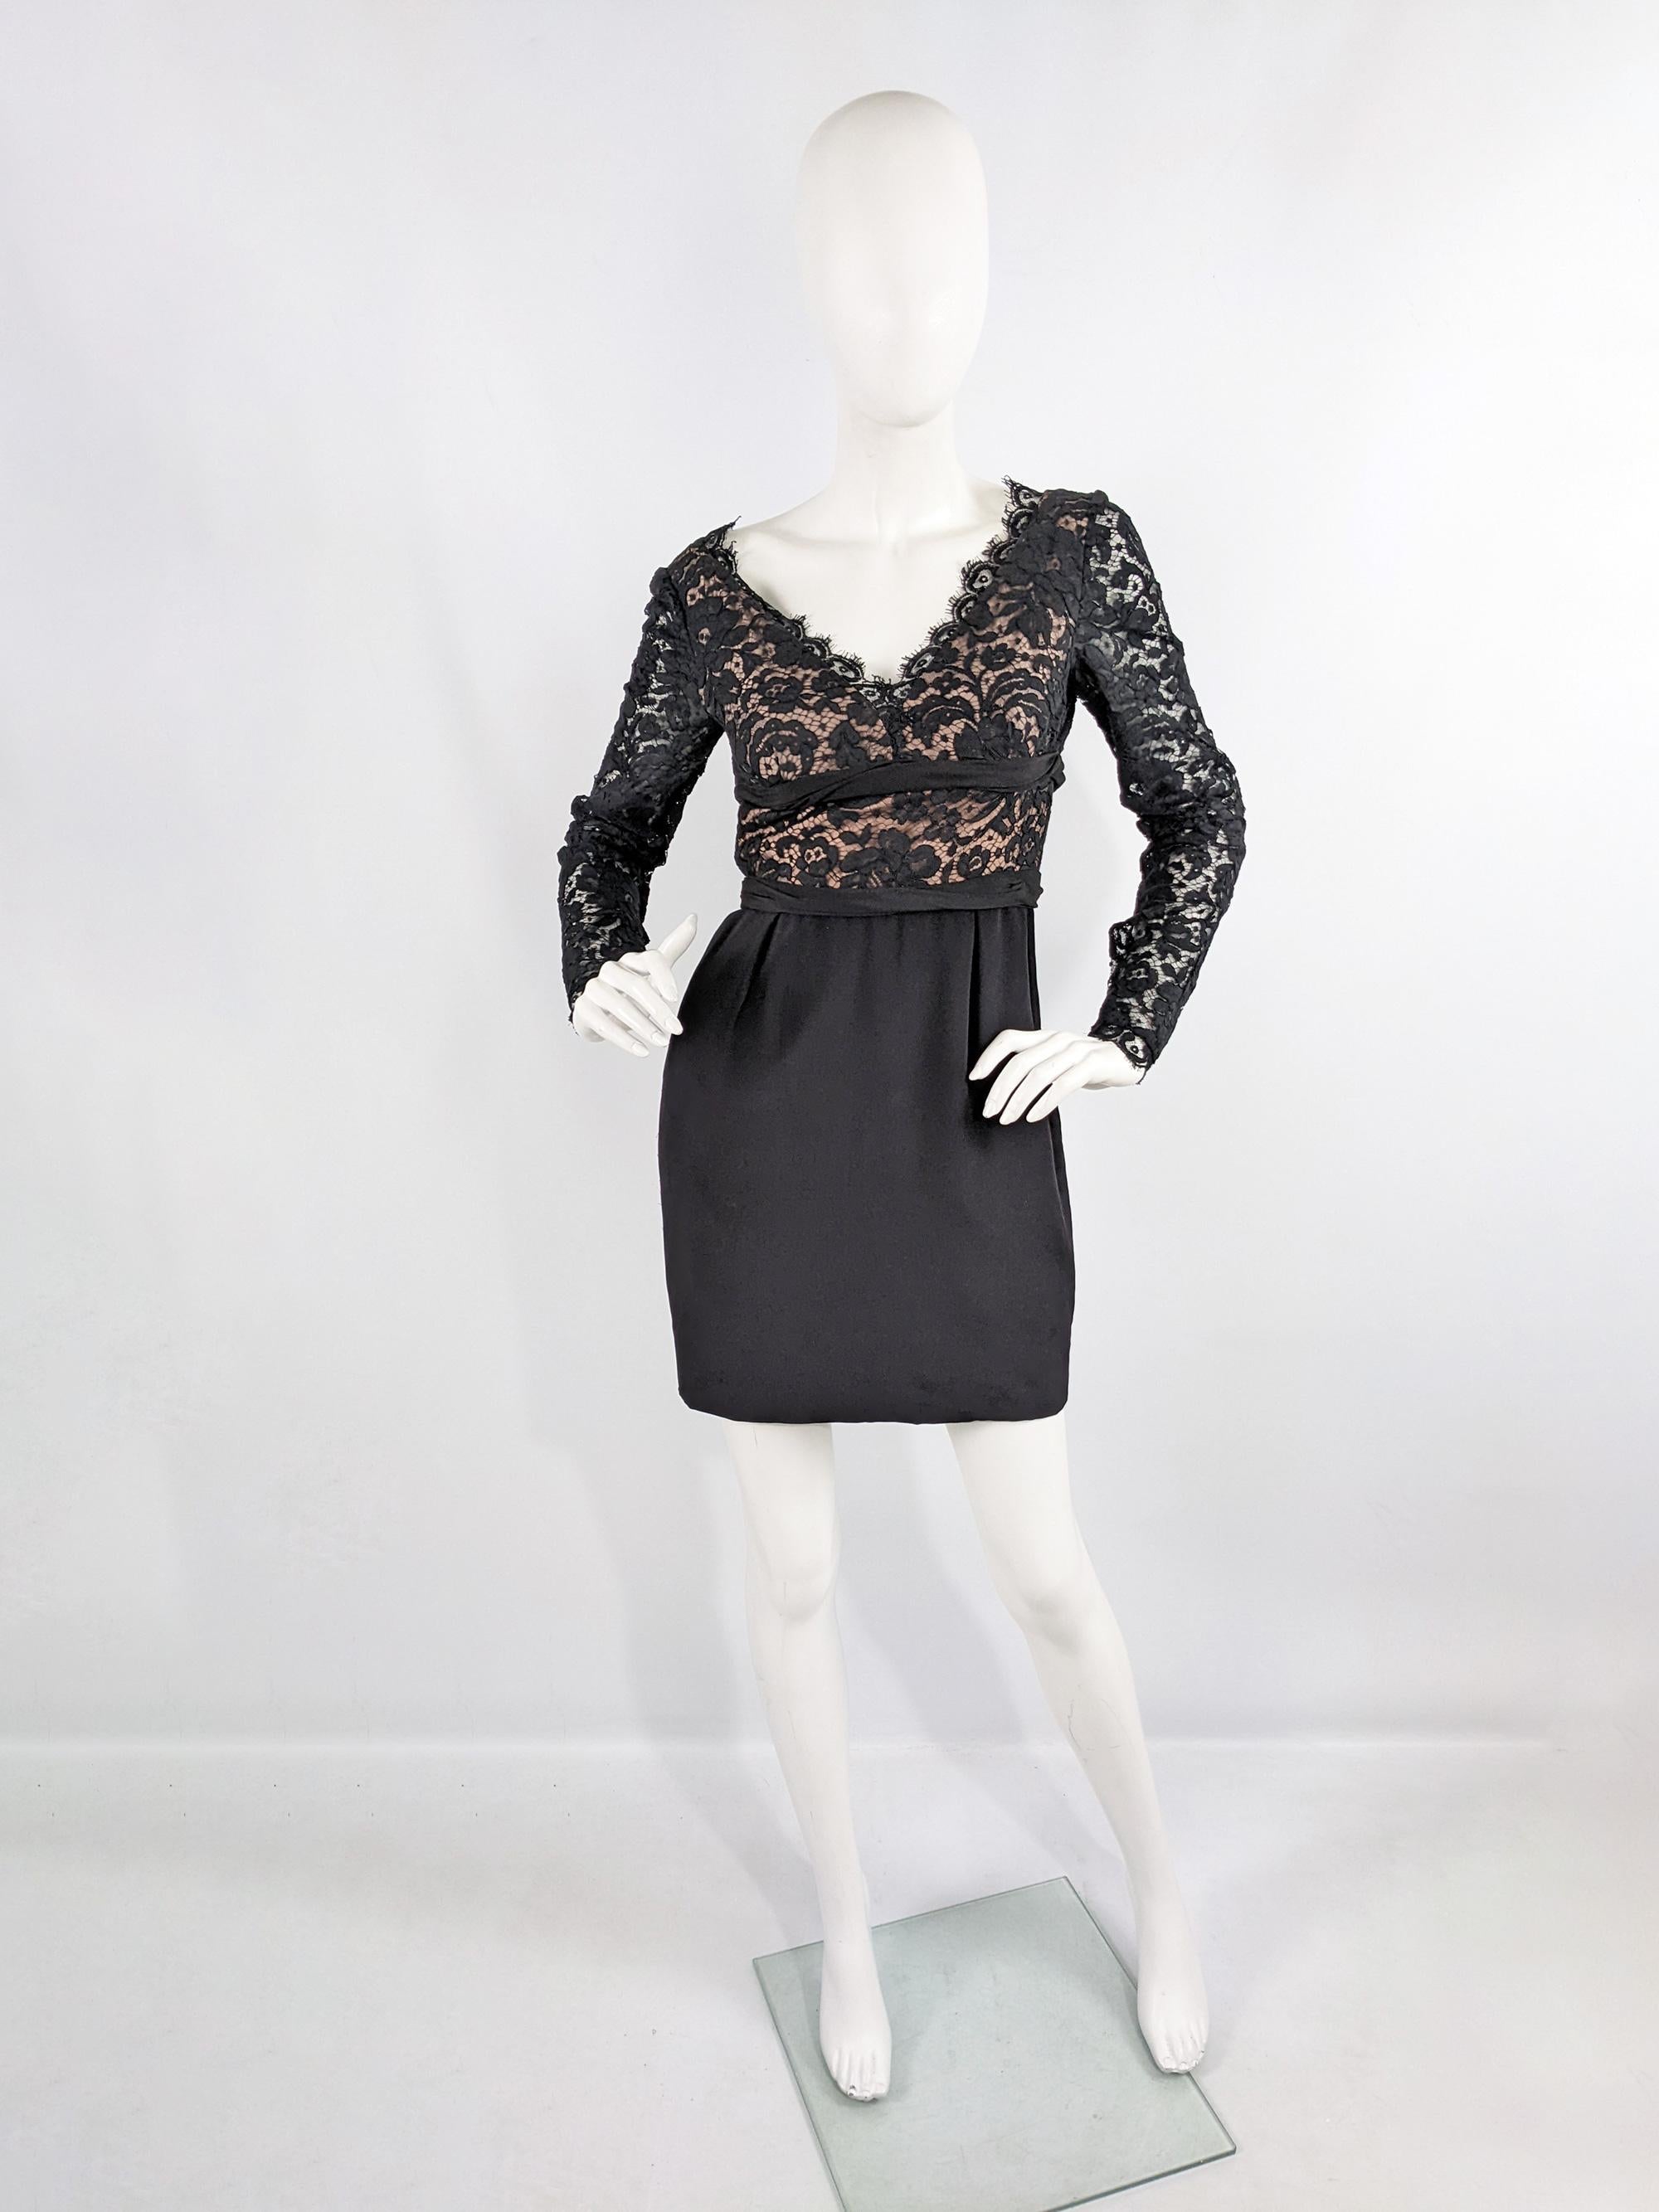 A glamorous vintage womens party dress from the 80s by luxury American designer, Donald Deal for high end department store, Bergdorf Goodman. In a nude fabric with a sexy, sheer lace overlay and a black wool skirt.

Size: Marked vintage 4 but